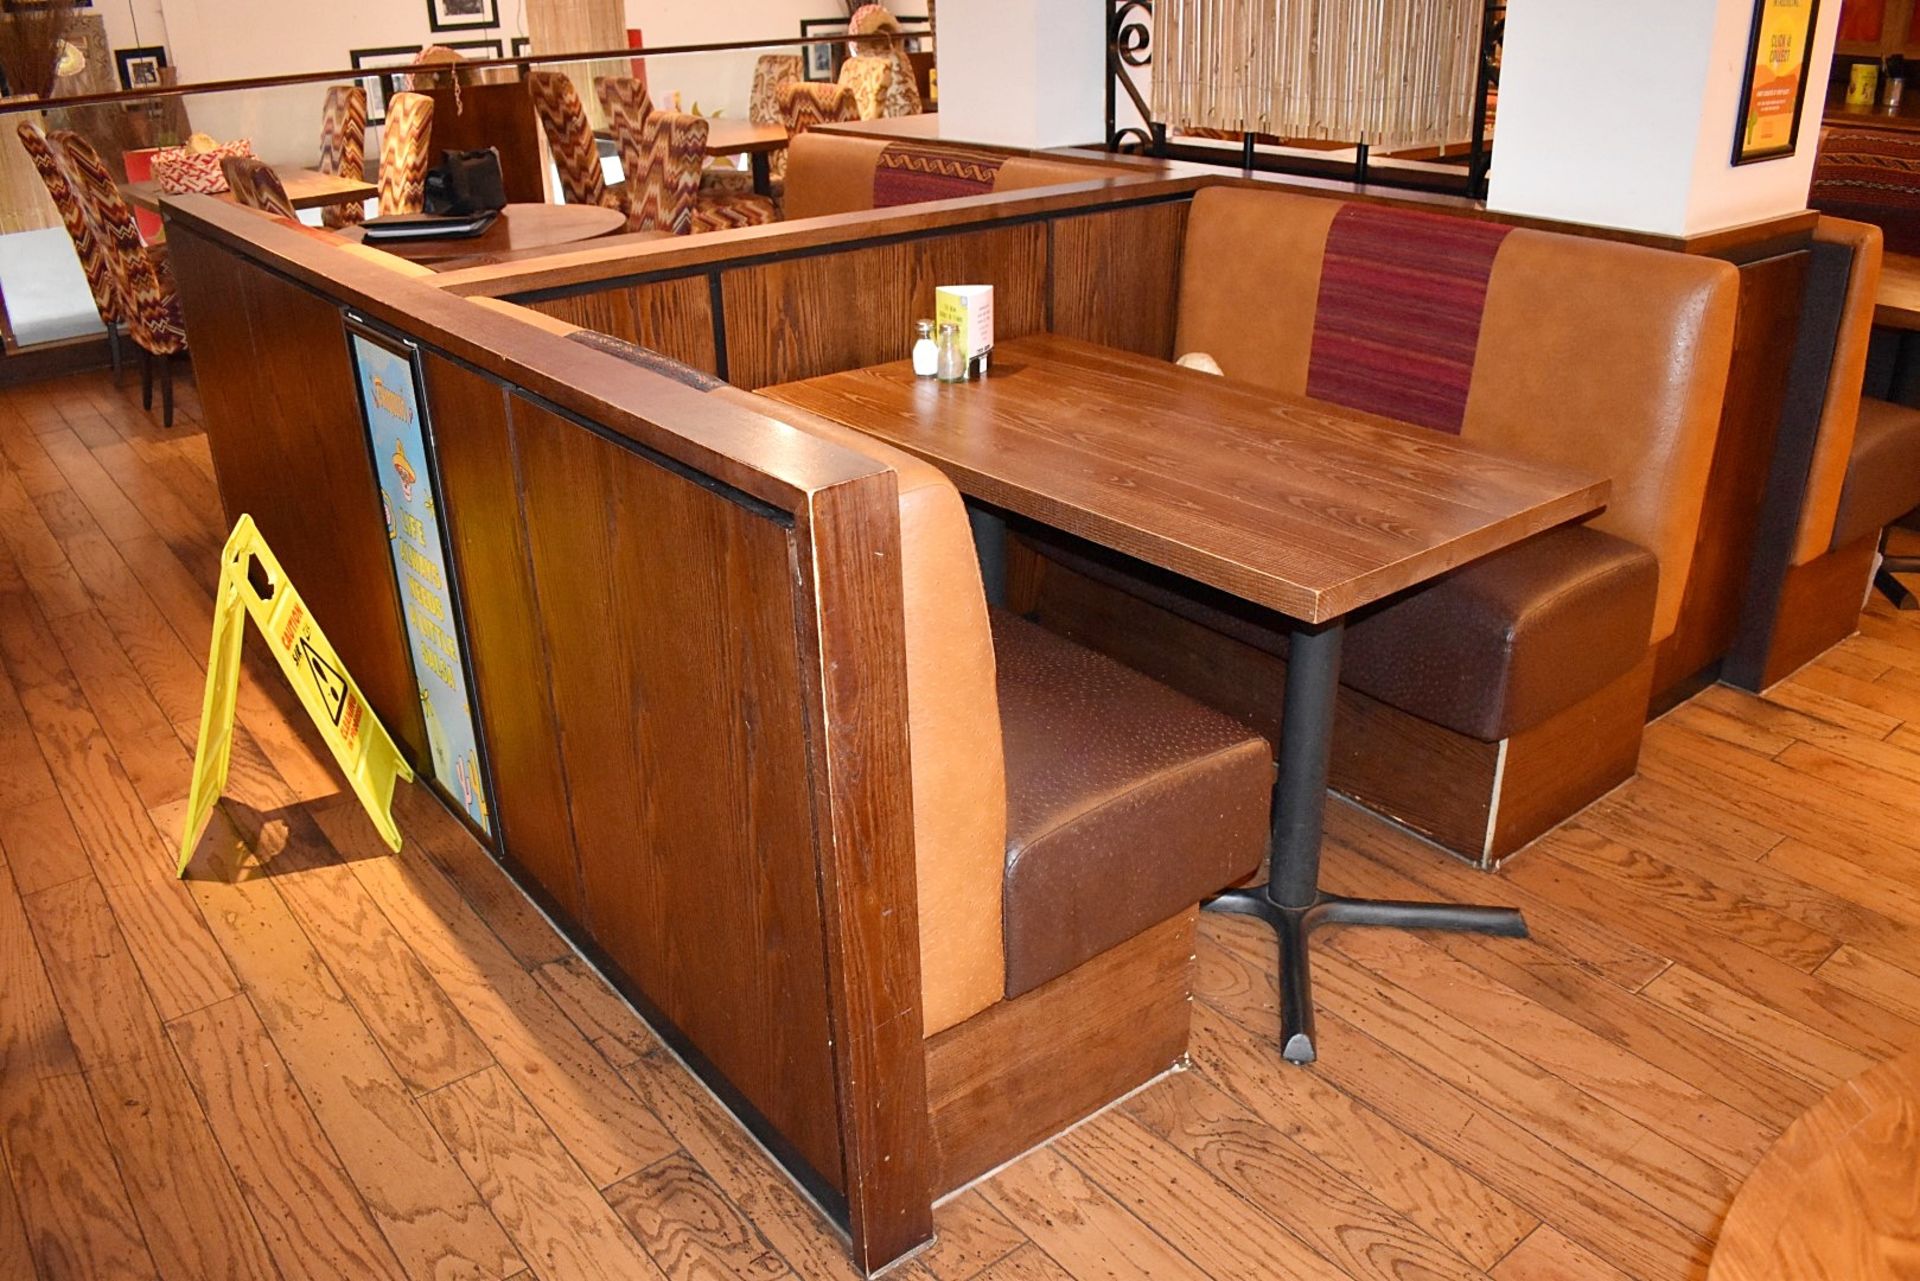 15-Pieces Of Restaurant Booth Seating Of Varying Length - Image 3 of 22